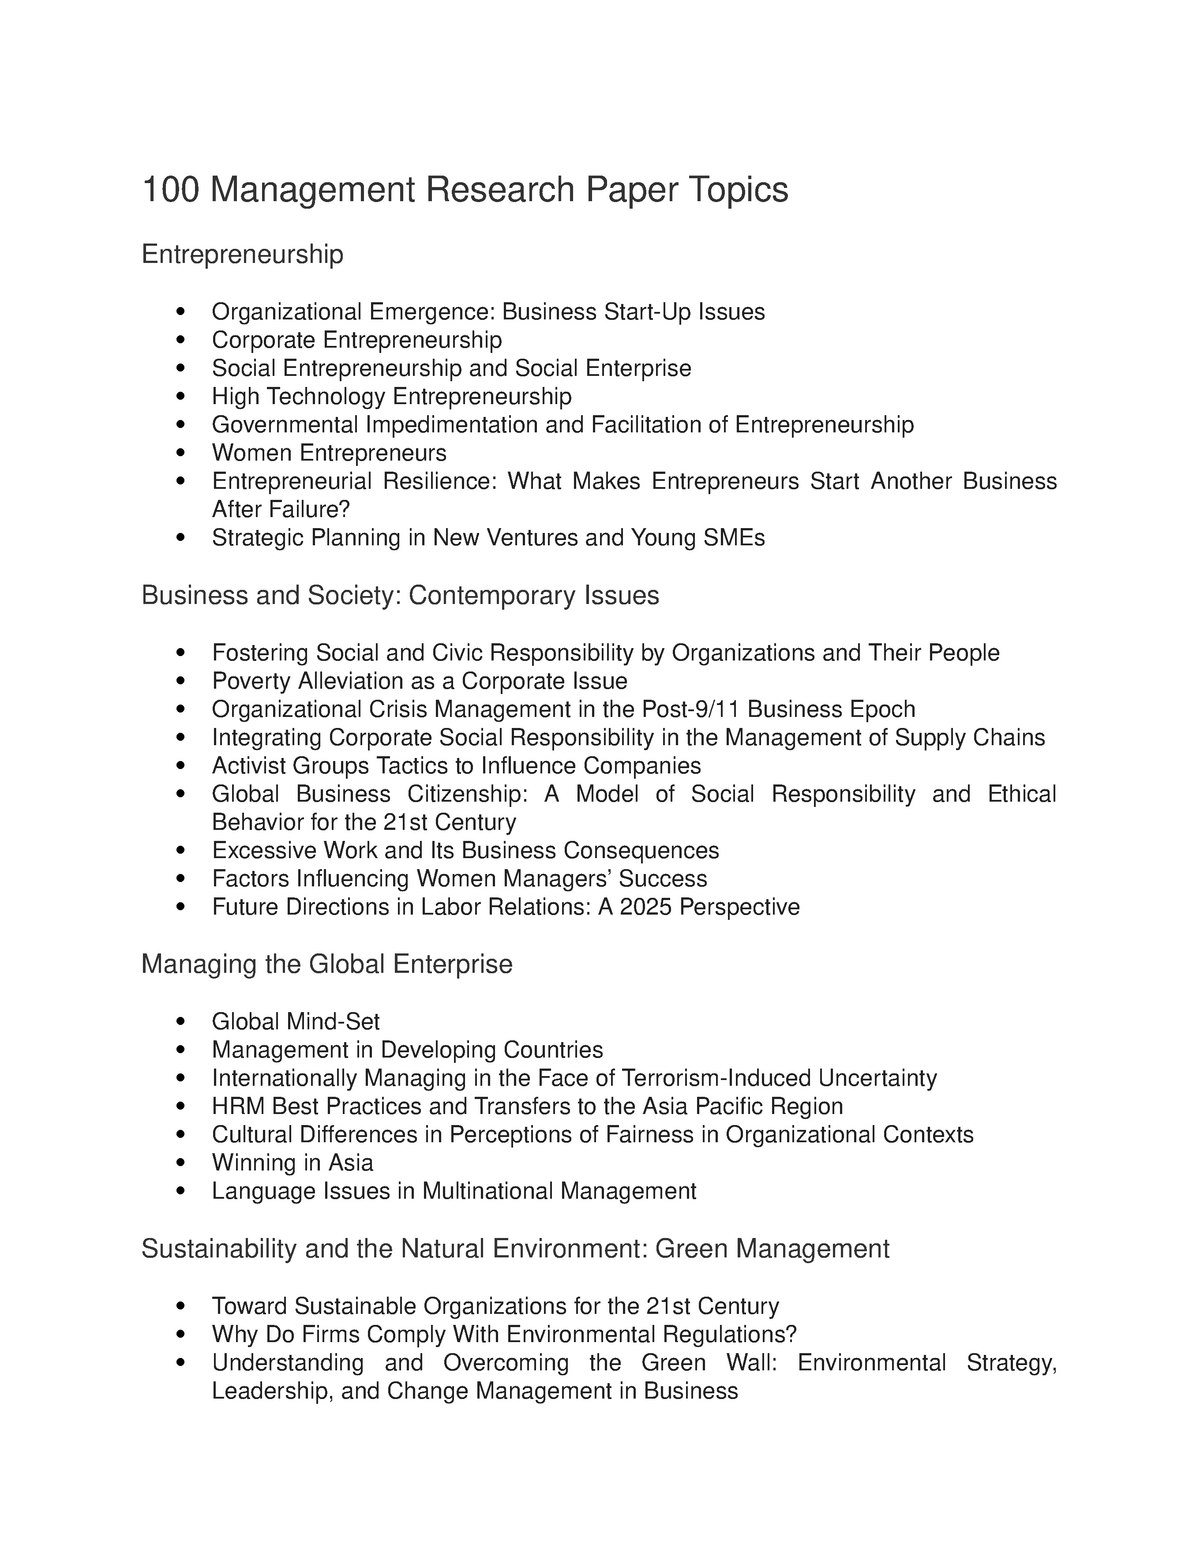 project cost management research paper